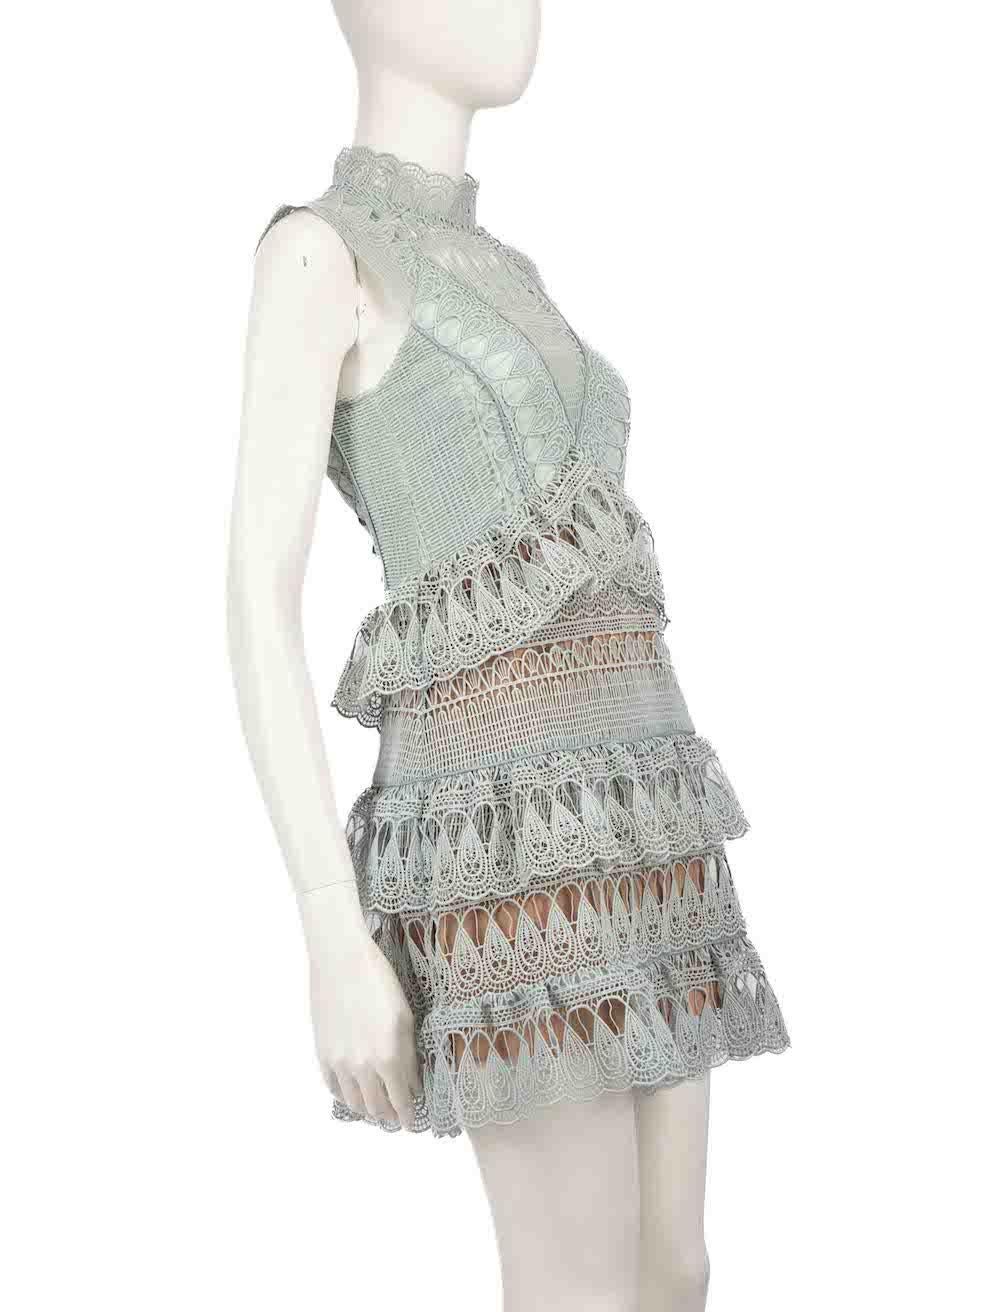 CONDITION is Very good. Minimal wear to dress is evident. Minimal wear to the dress is seen with discolouration marks near the armhole area on this used Self-Portrait designer resale item.
 
 
 
 Details
 
 
 Mint green
 
 Lace
 
 Mini dress
 
 Mock